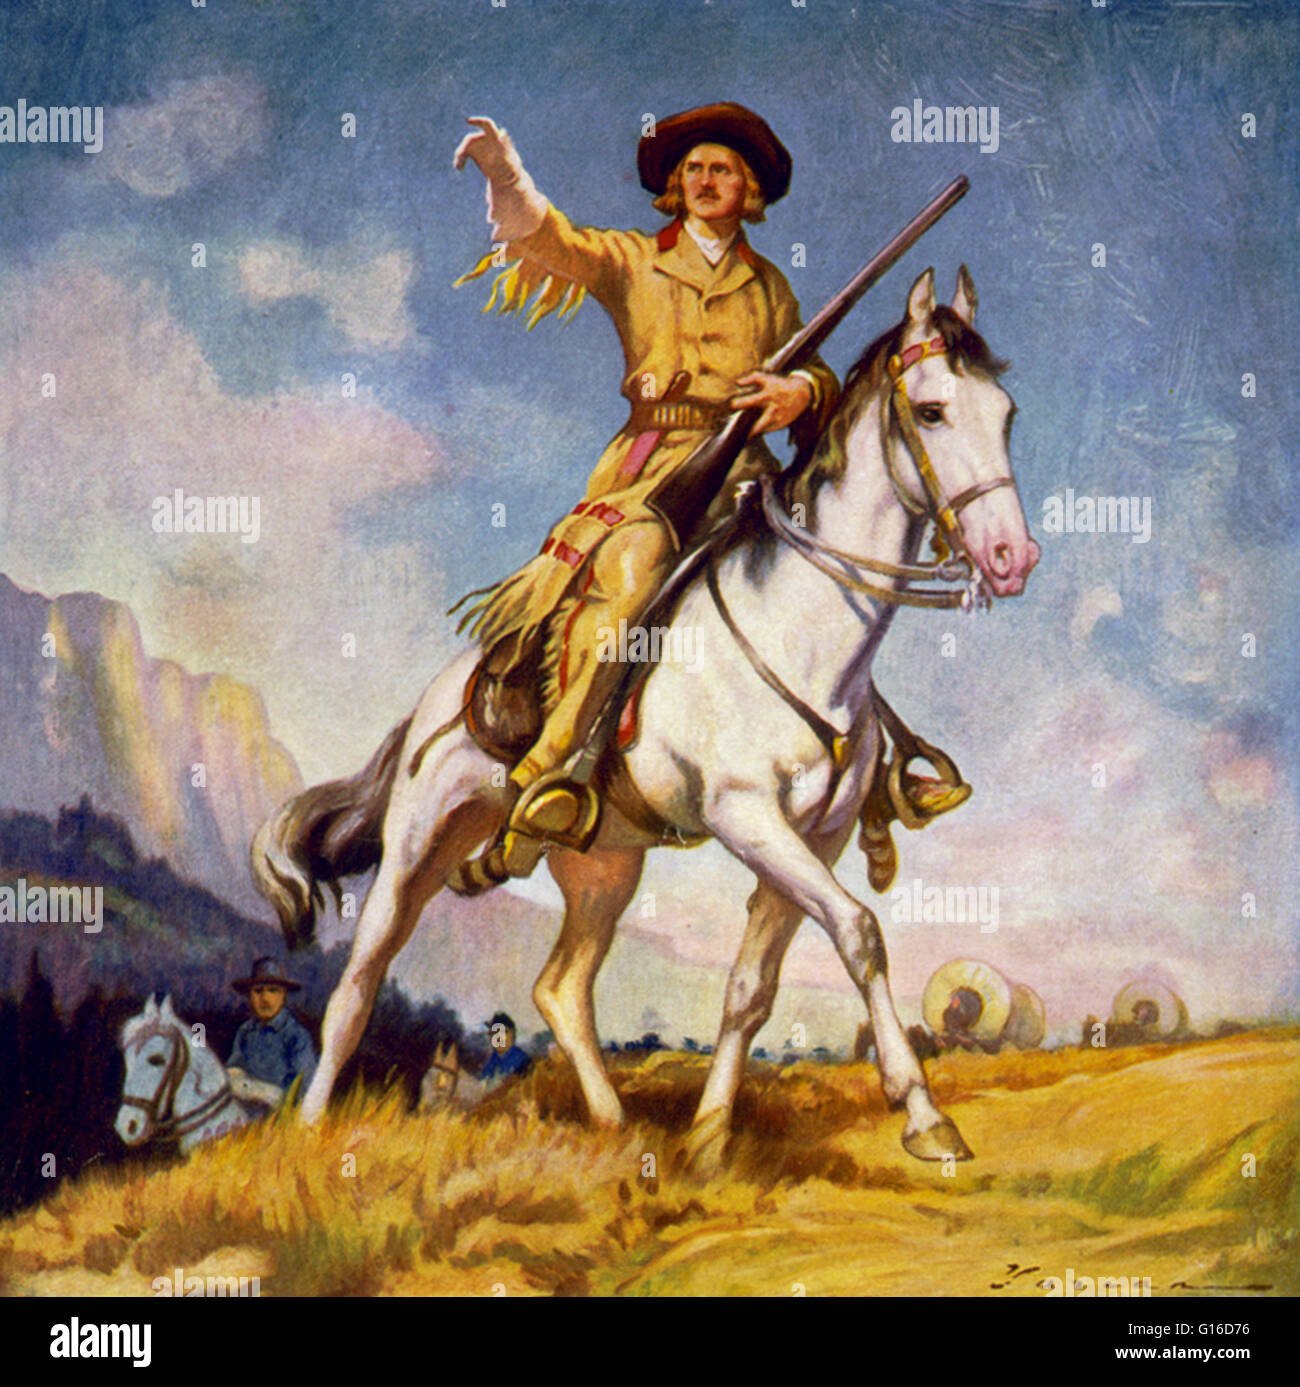 Entitled: "The Youth's Companion. Historic milestones. Kit Carson", 1922. Showing Carson, on horseback, holding rifle with left arm, pointing with right arm, with troops behind him. Christopher Houston Carson (December 24, 1809 - May 23, 1868), known as K Stock Photo